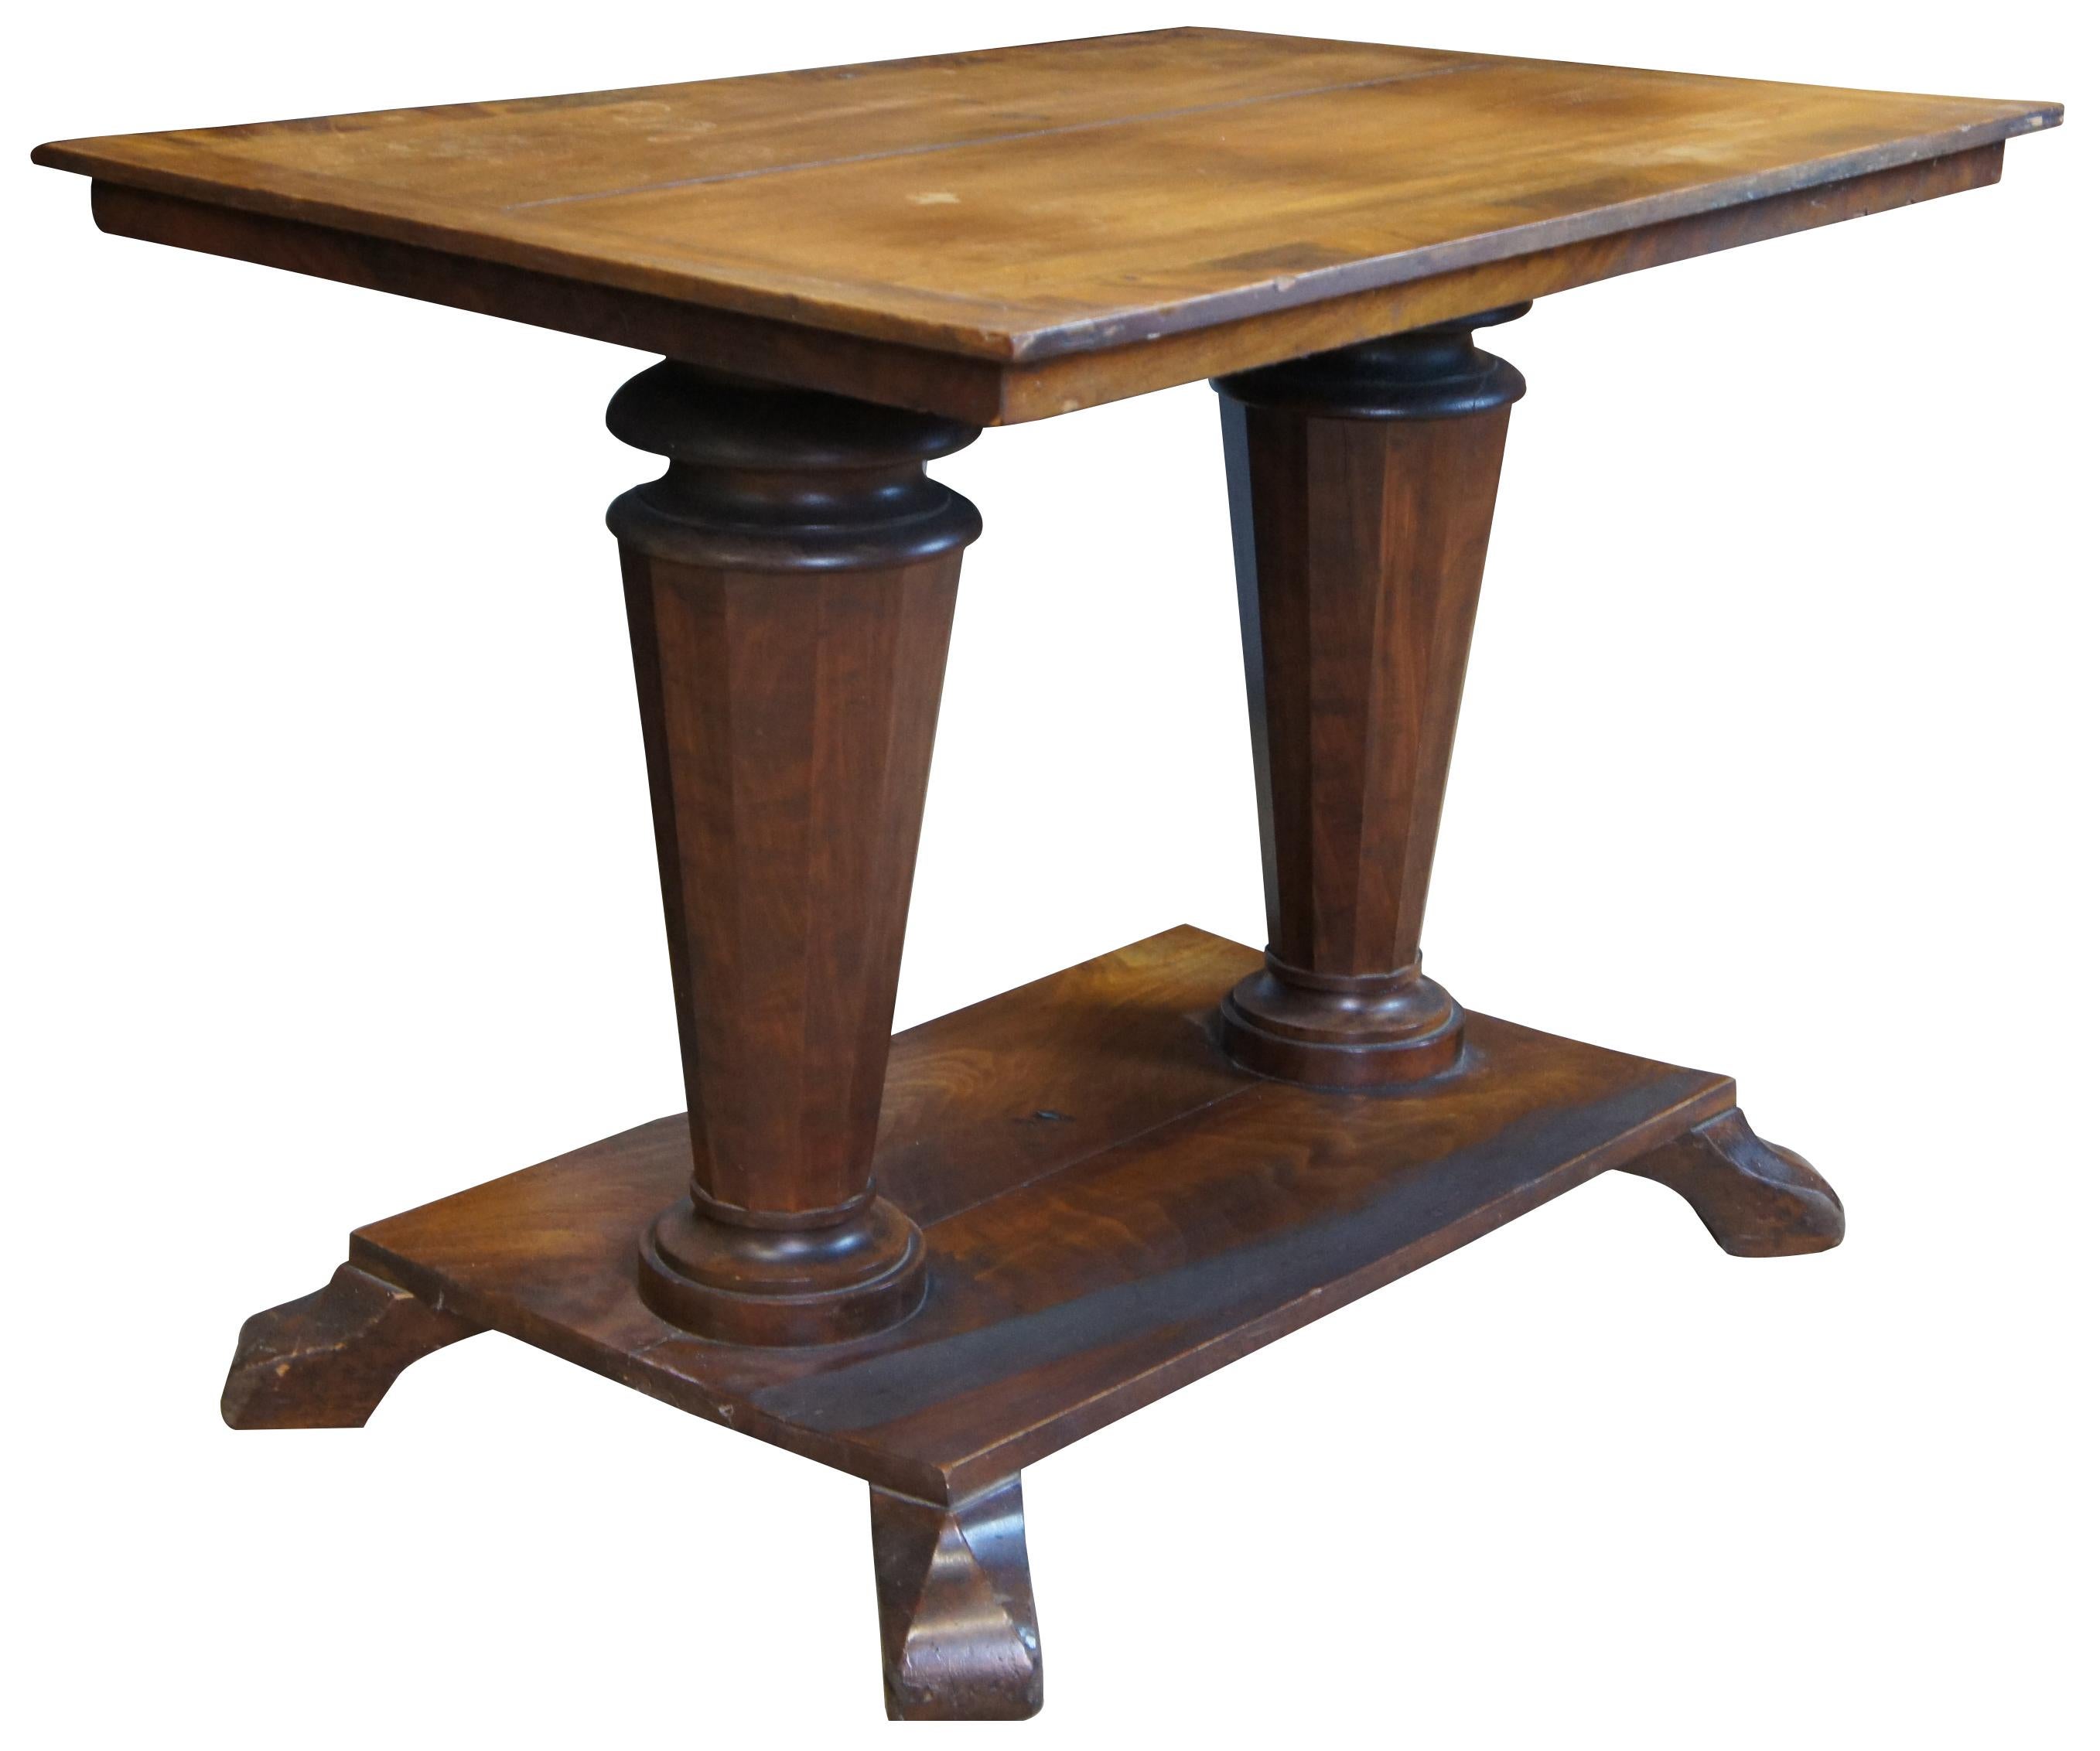 Antique American Empire double pedestal / pillar library table. Made of mahogany featuring rectangular form with two large turned and tapered columns.
 